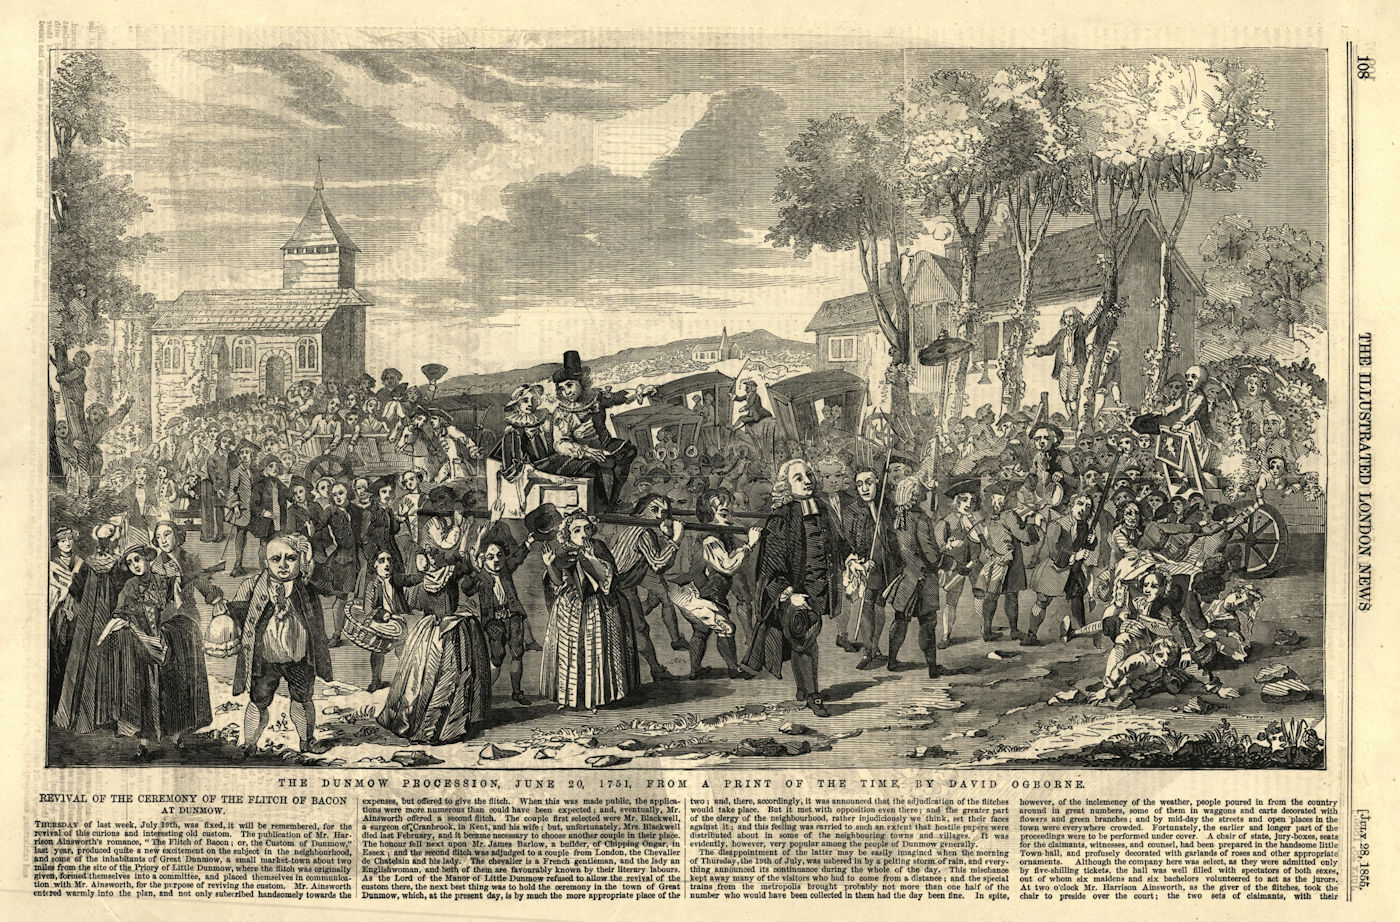 Associate Product The Dunmow Procession, June 20, 1751. Essex. Society 1855 ILN full page print